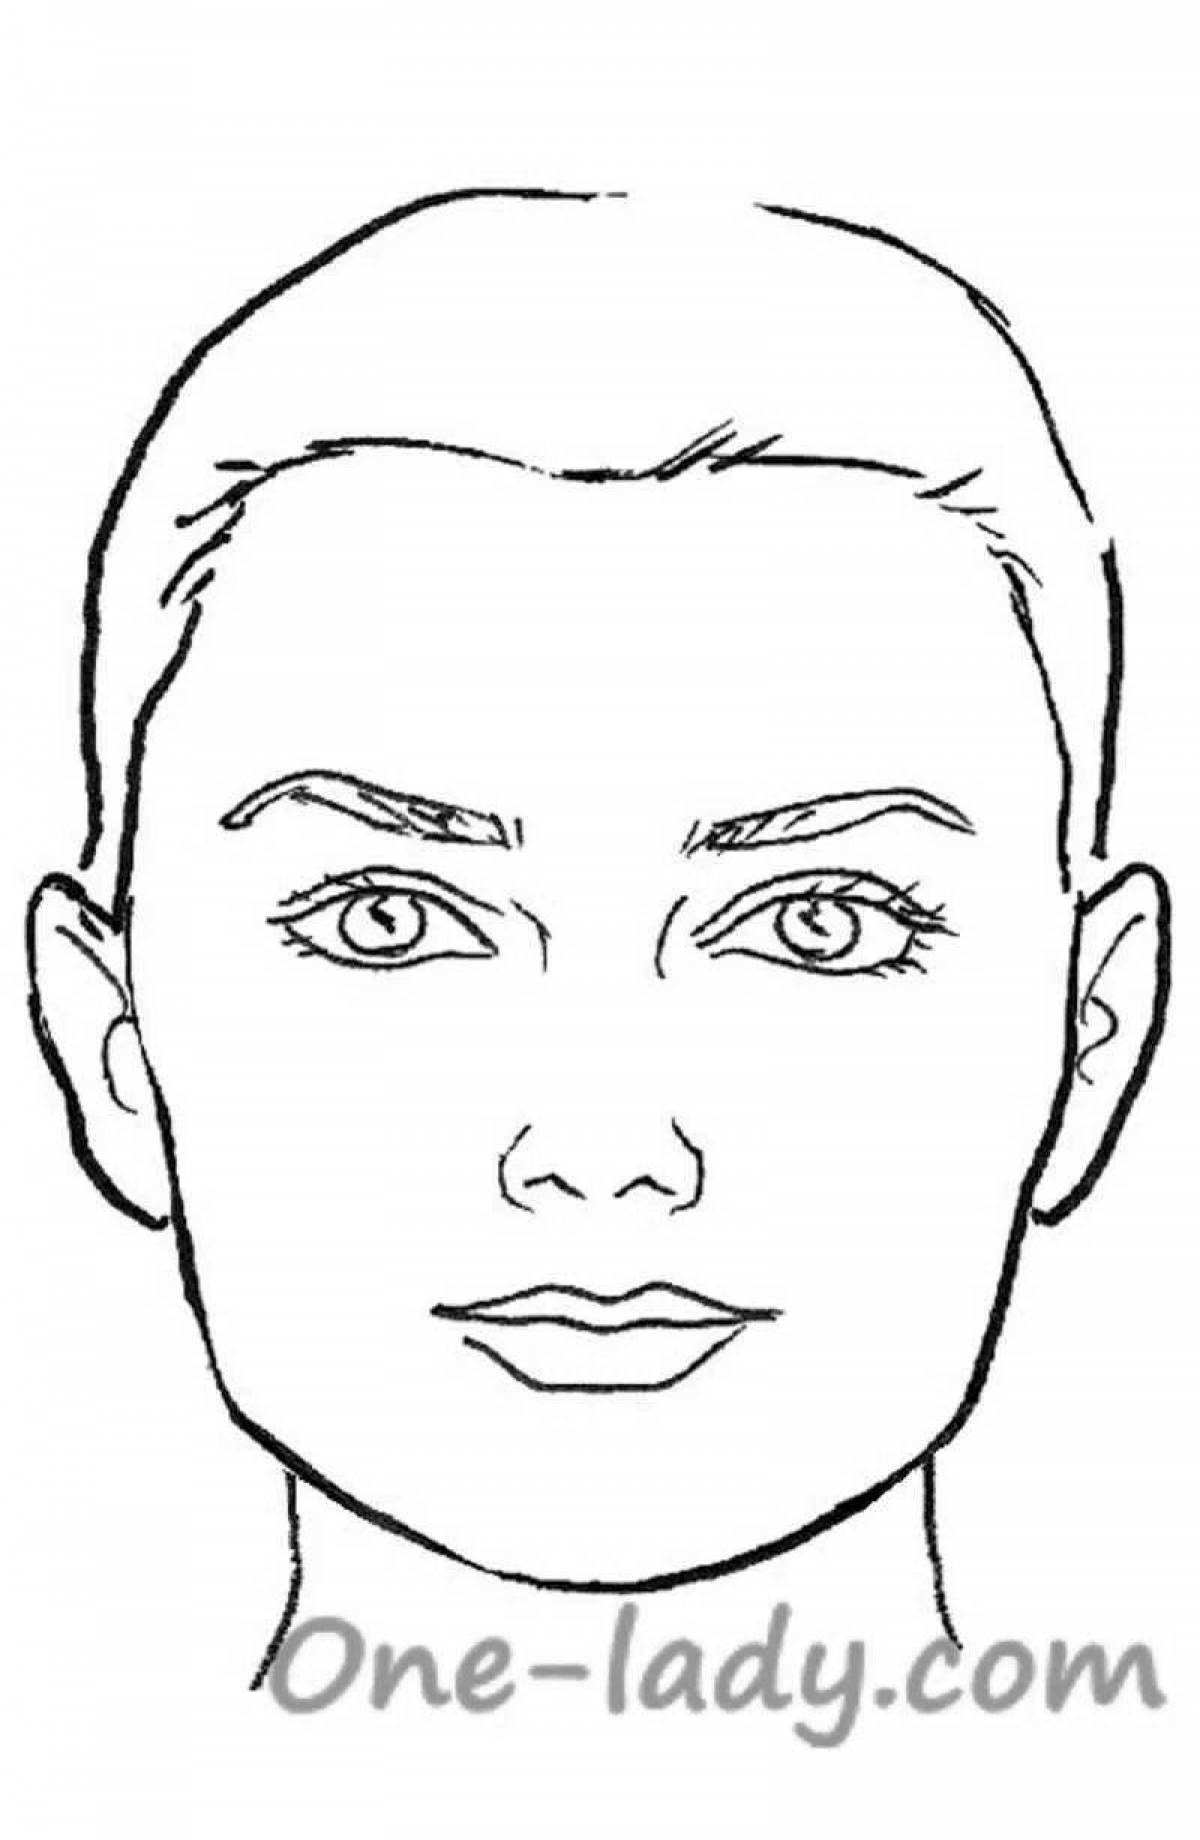 Bright drawing of a human face